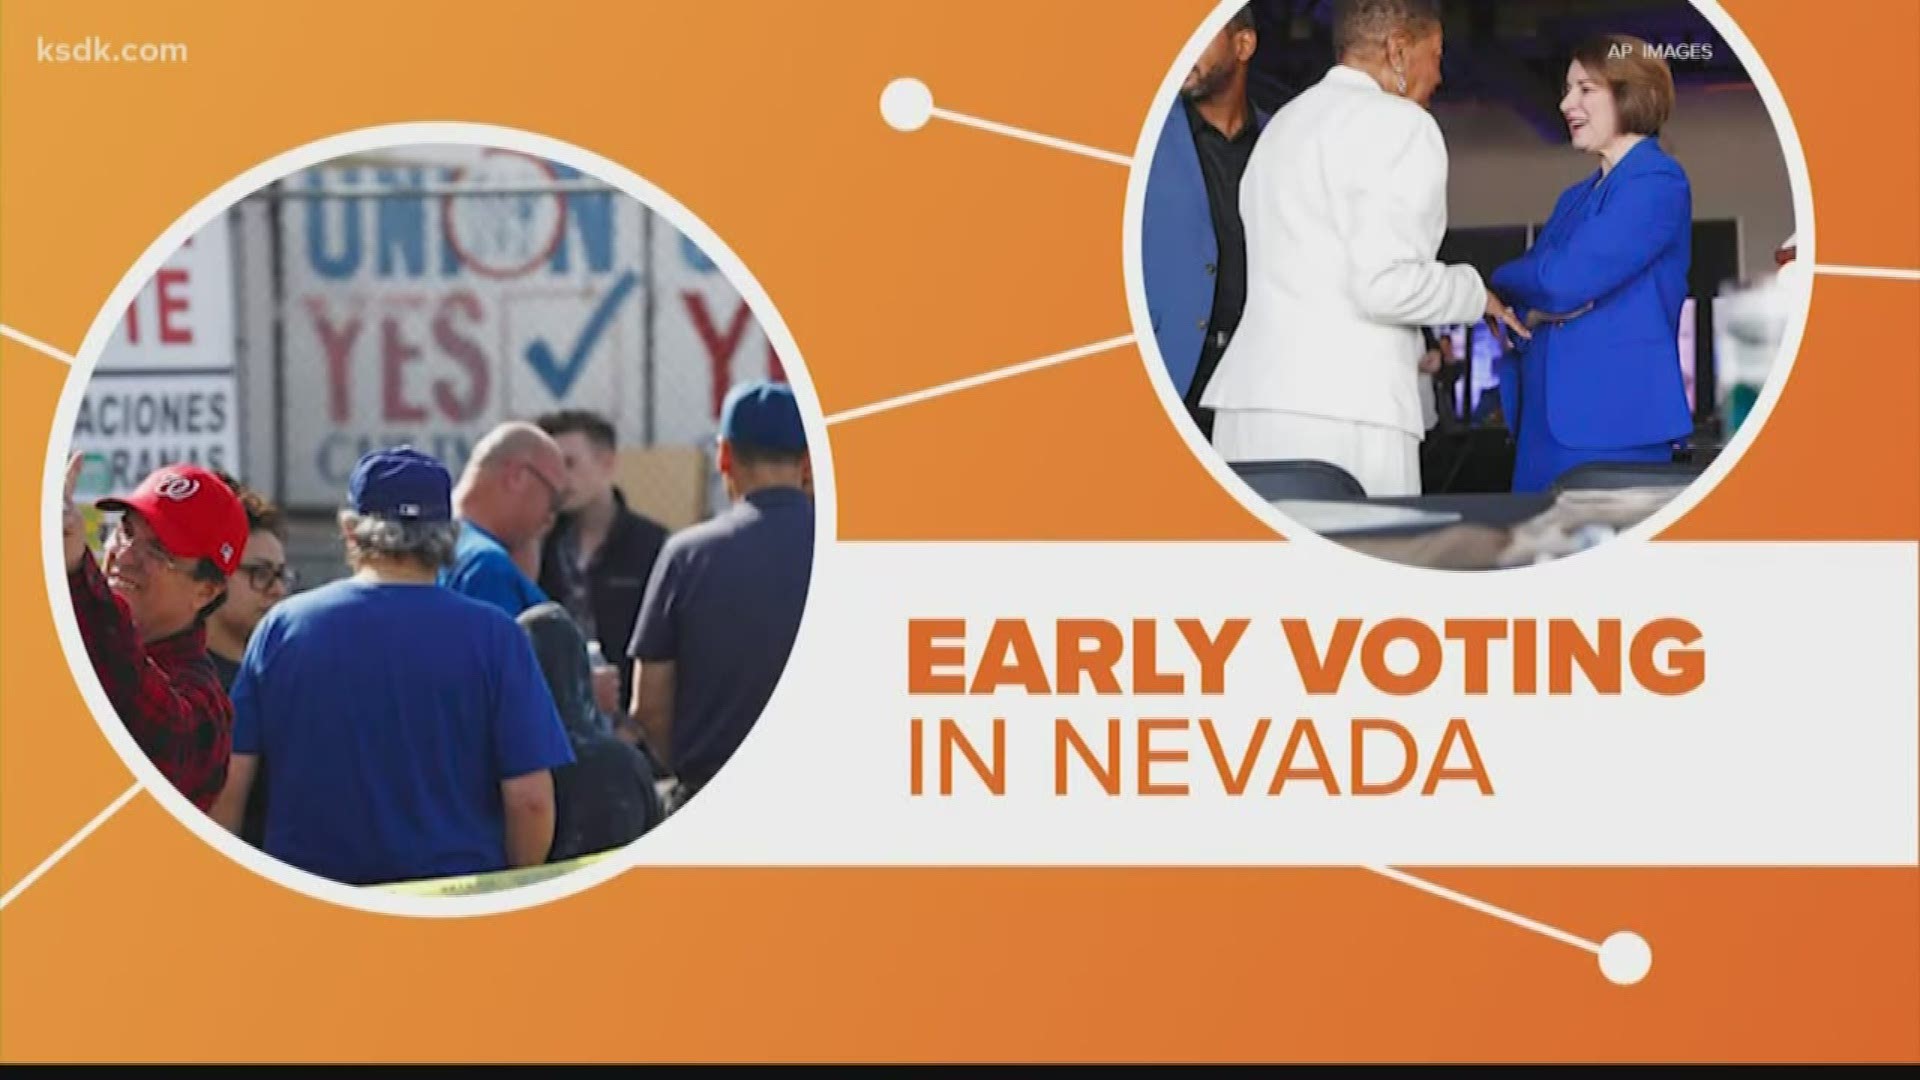 The Nevada Caucus is Feb. 22, but thousands of people have already cast their votes